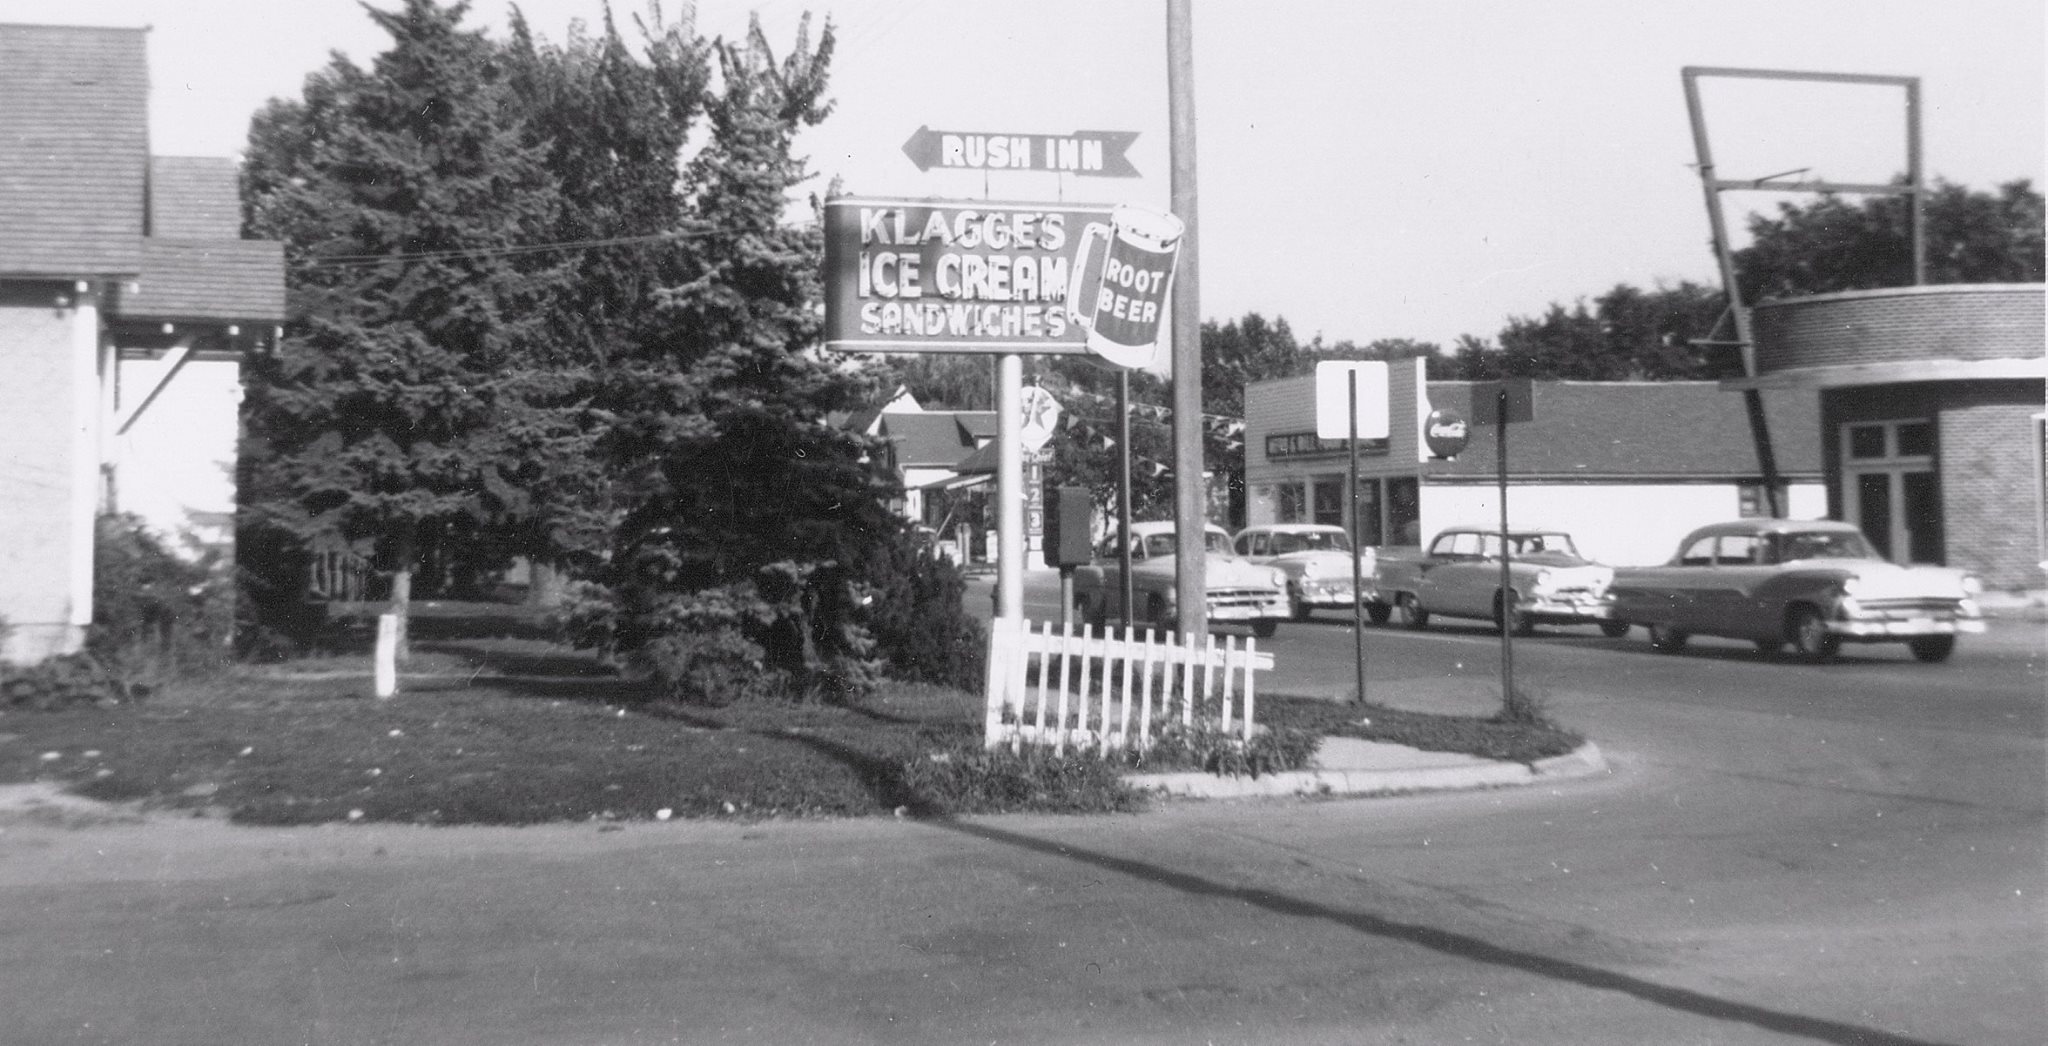 RUSH INN and Rush's house corner of Oakland Ave. and 12th St. NW, where the Muffler Clinic is now